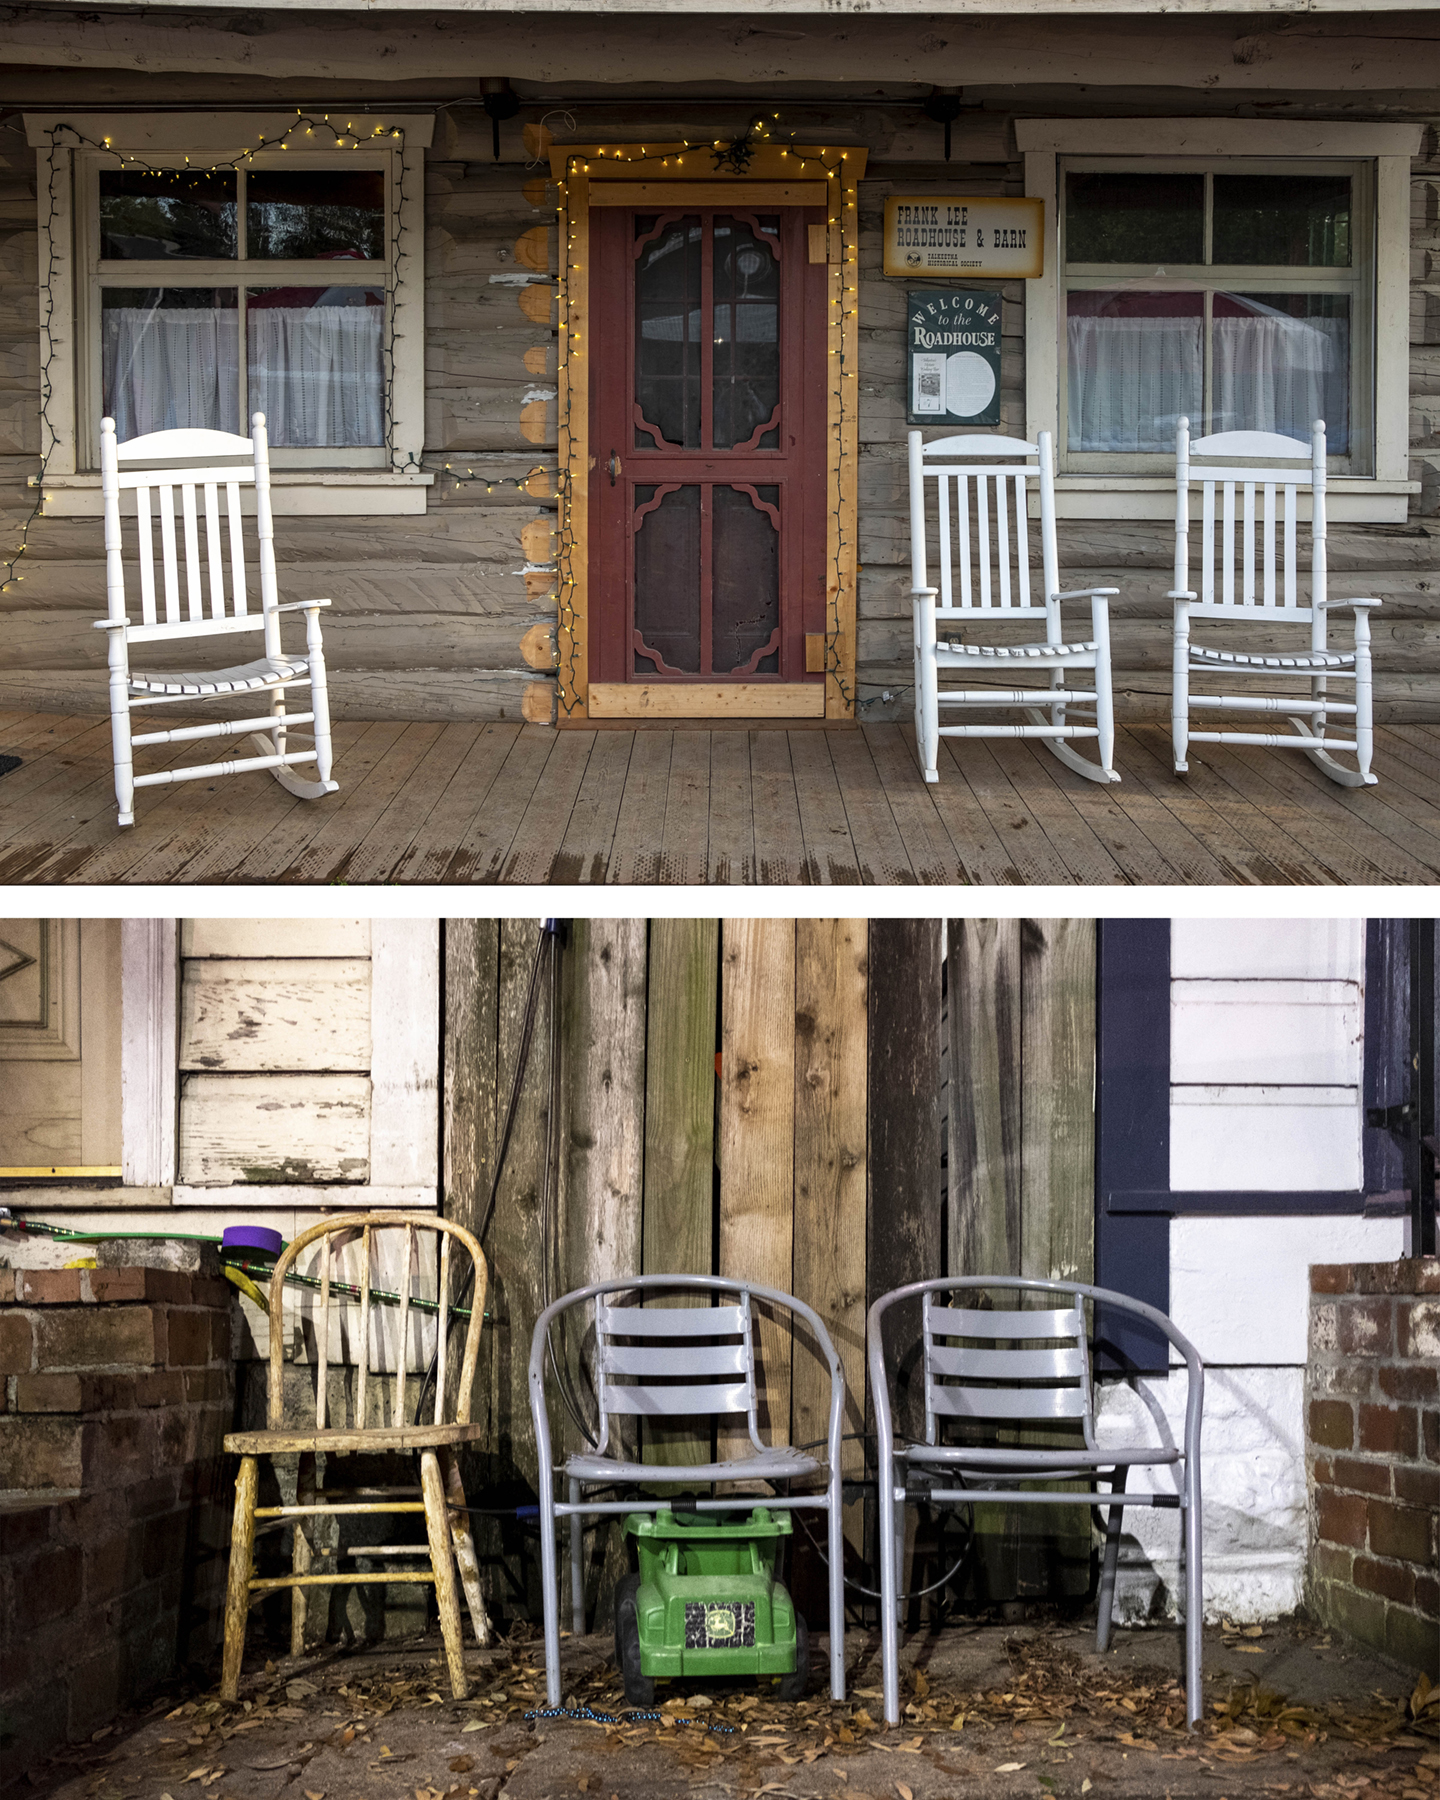 Deck chairs in Alaska and Louisiana, courtesy of the artist